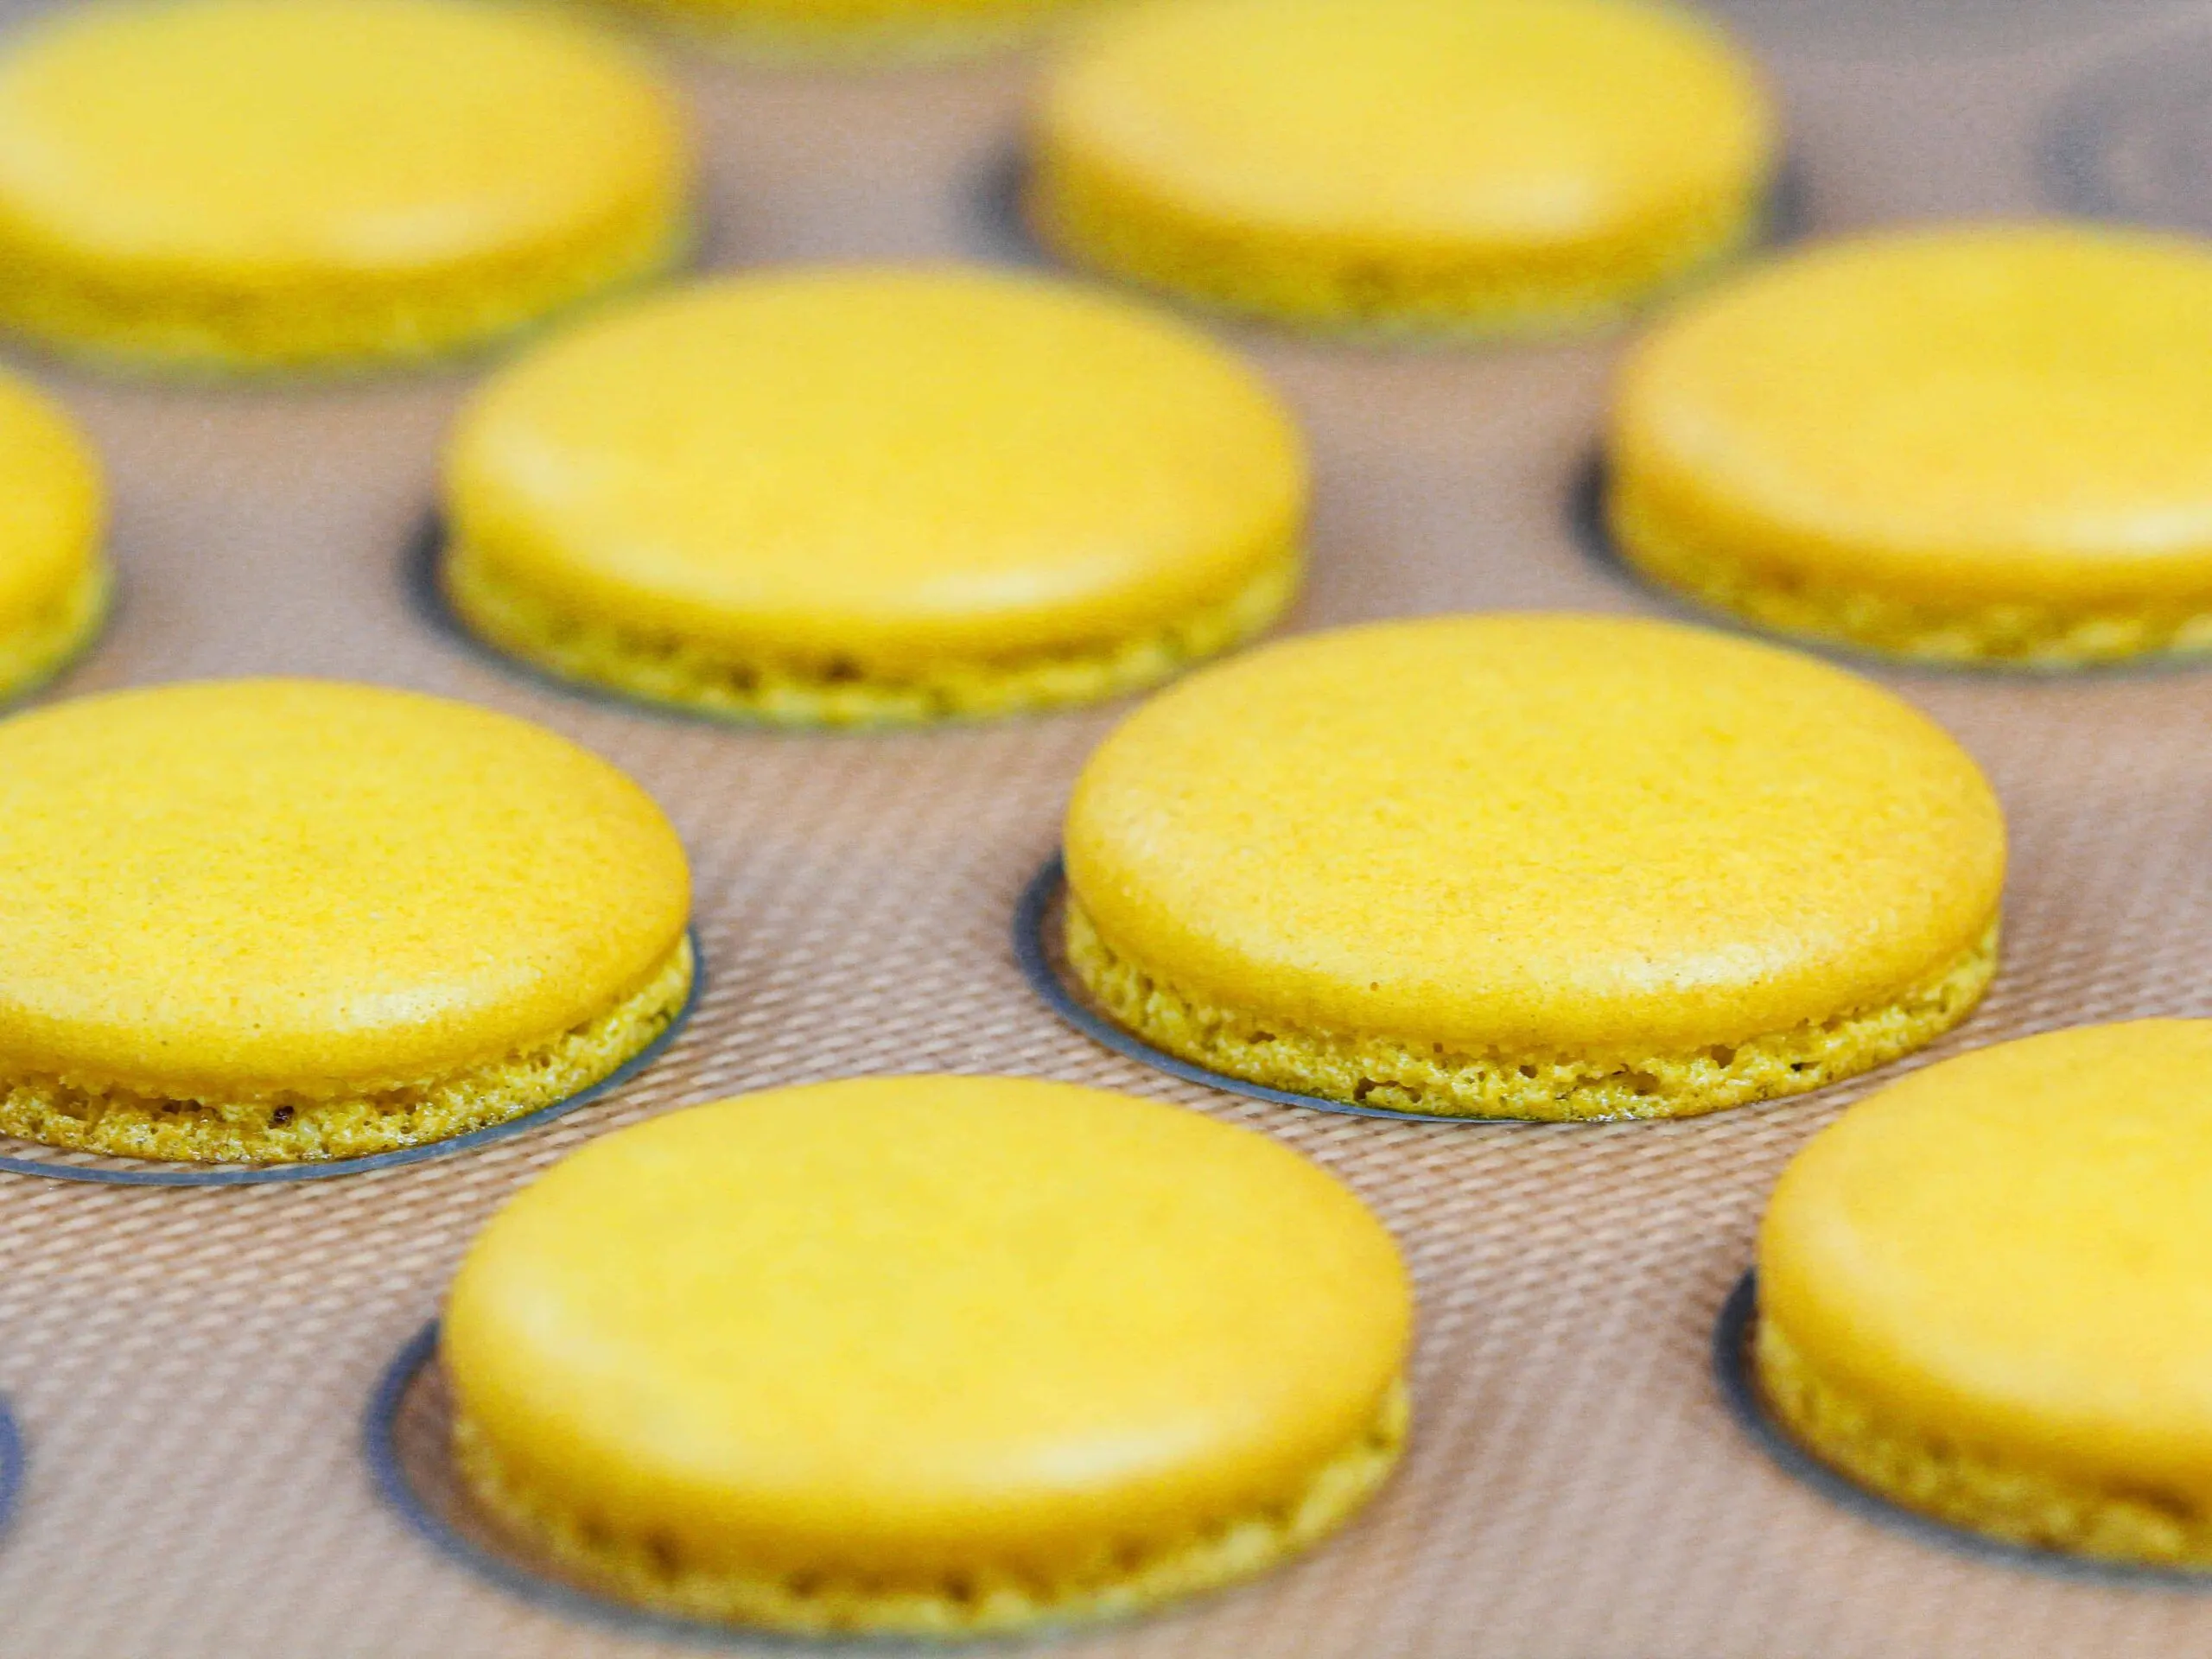 image of perfectly baked yellow macaron shells with feet and no browning